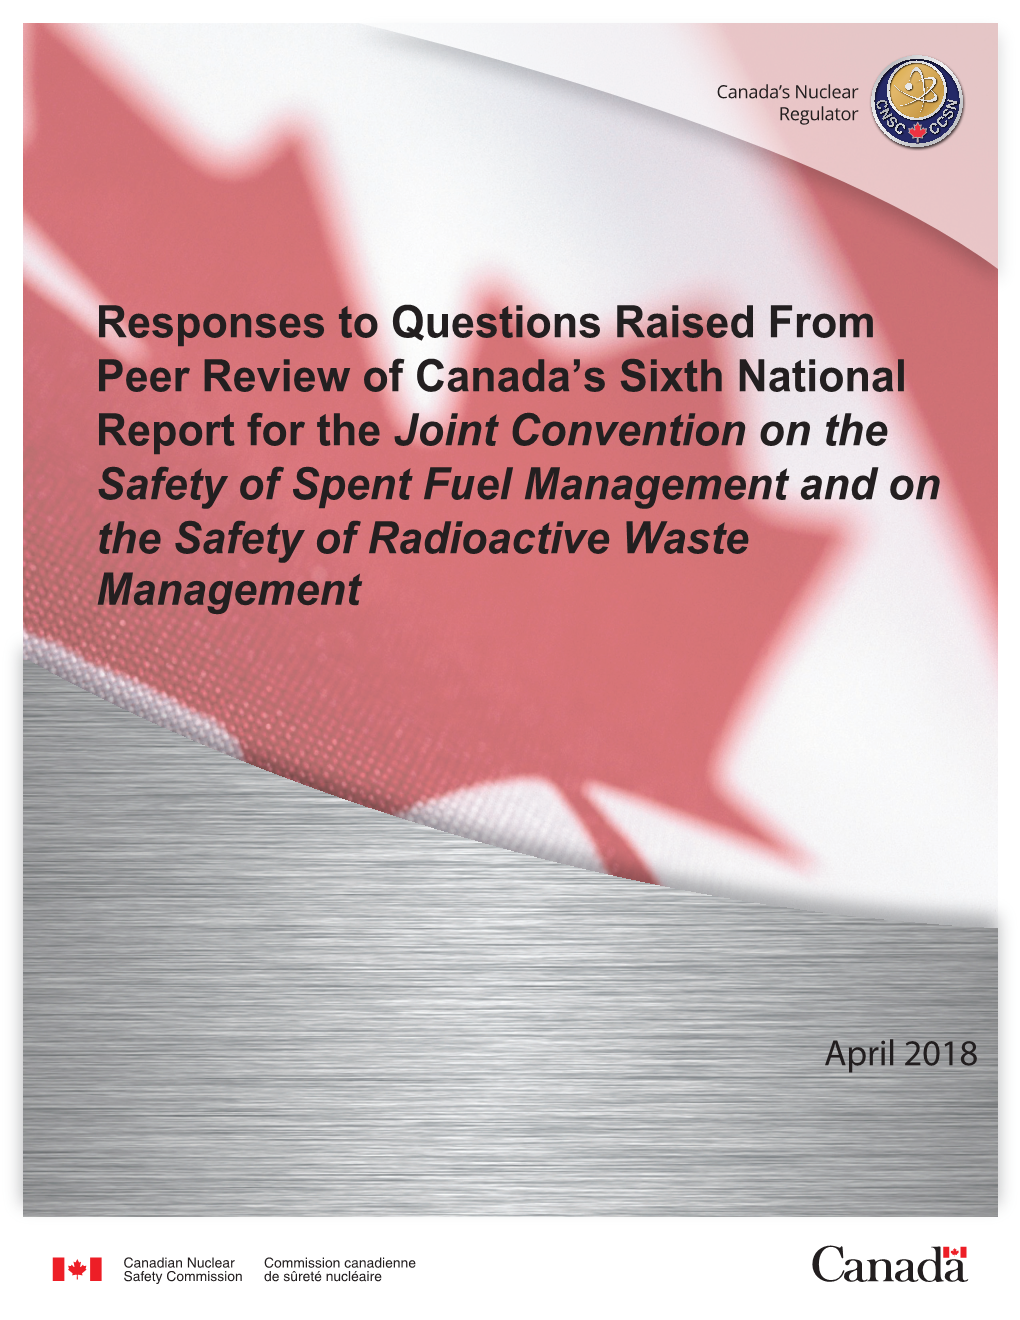 Responses to Questions Raised from Peer Review of Canada's National Report for the Joint Convention